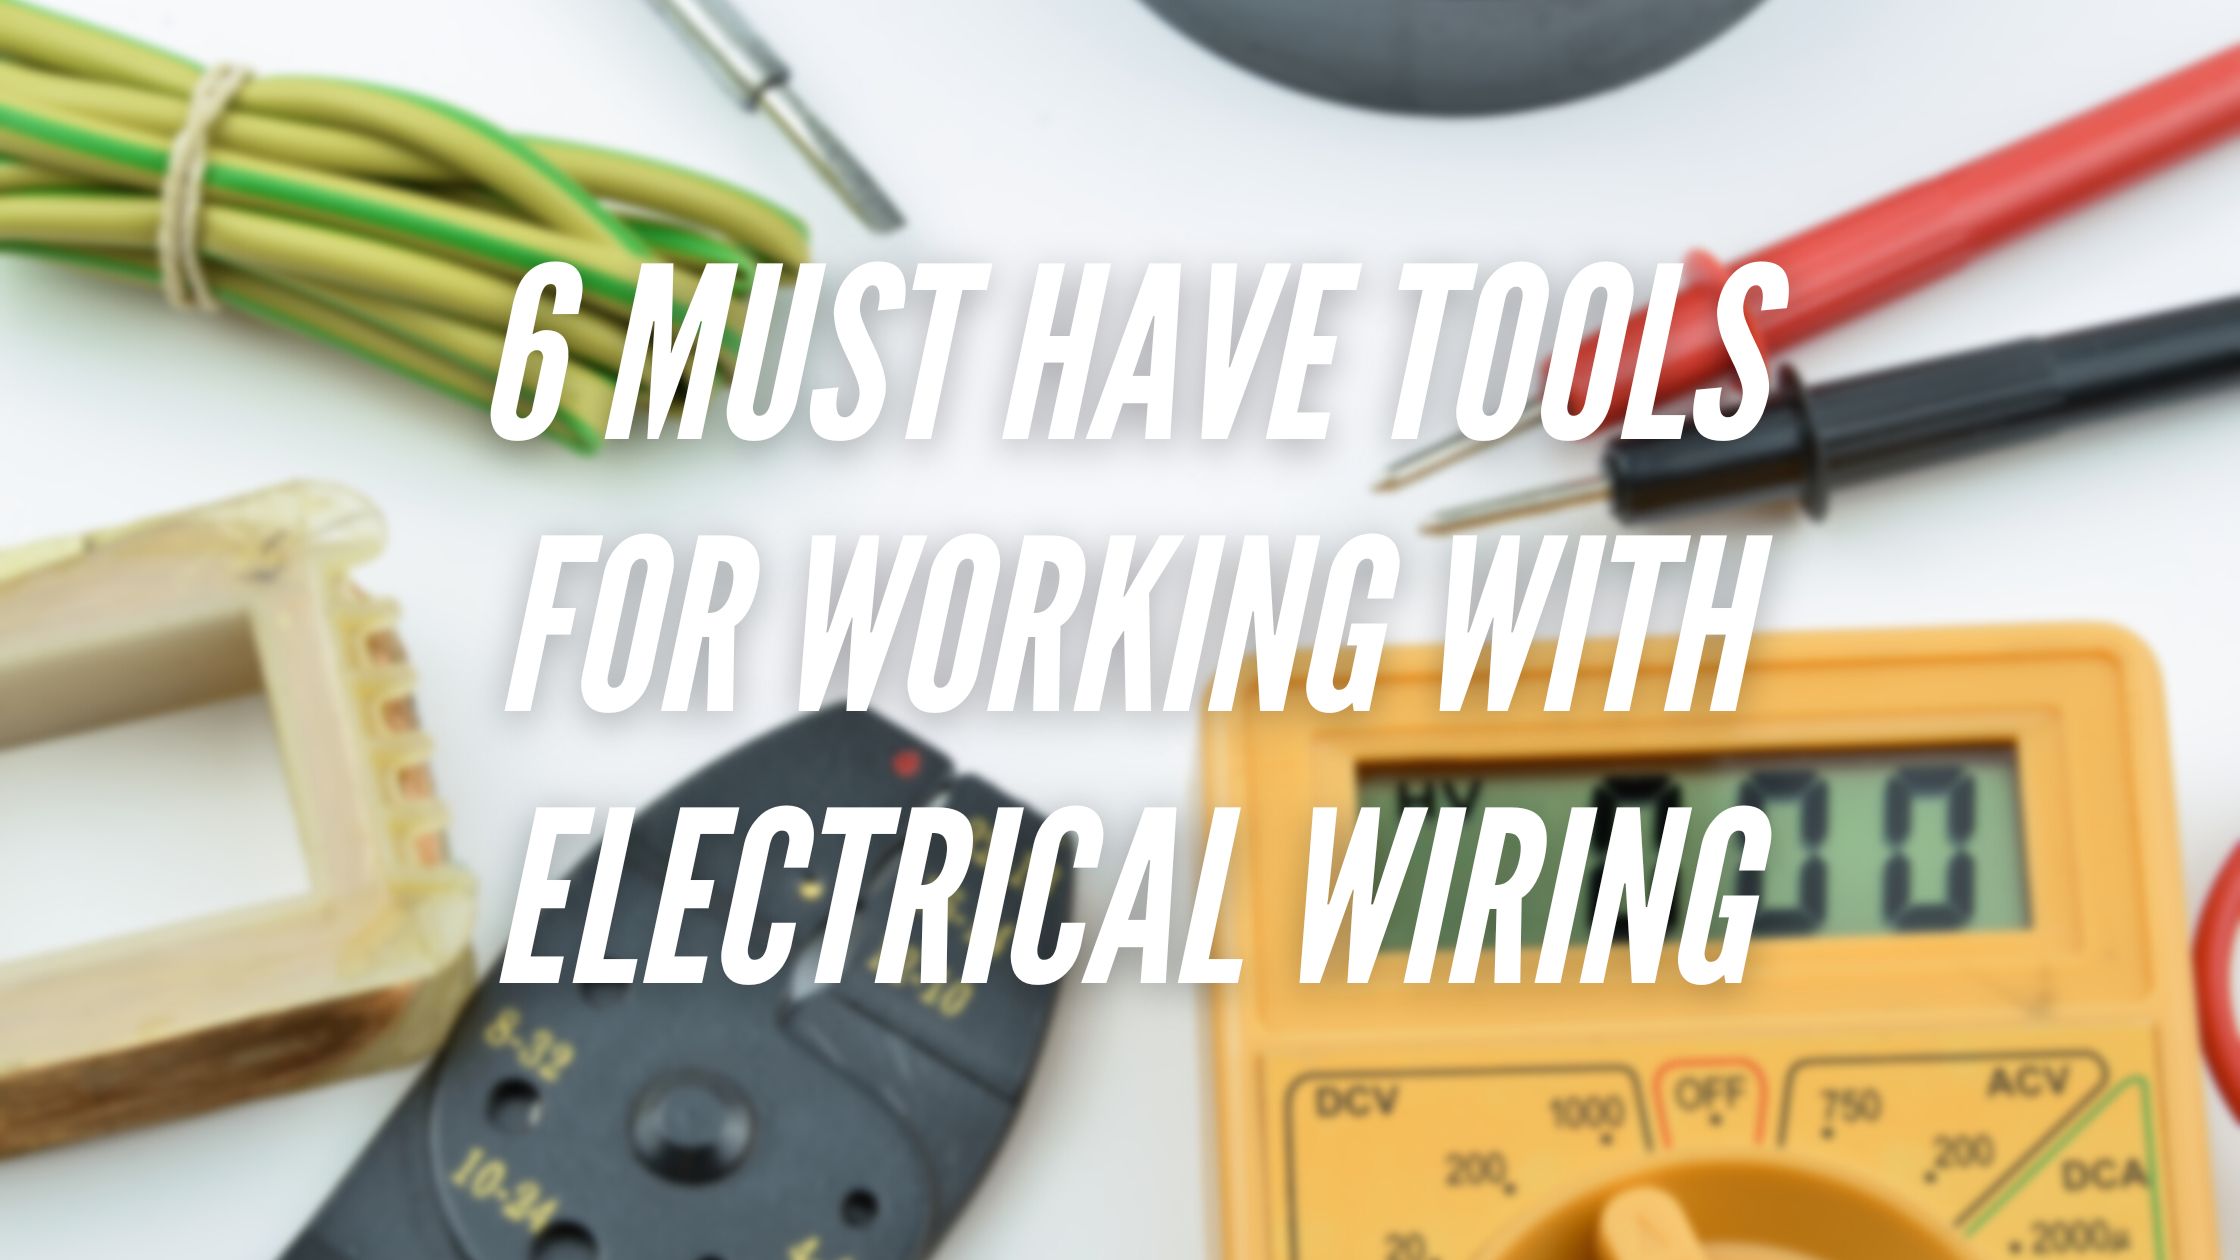 6 Must Have Tools for Working with Electrical Wiring